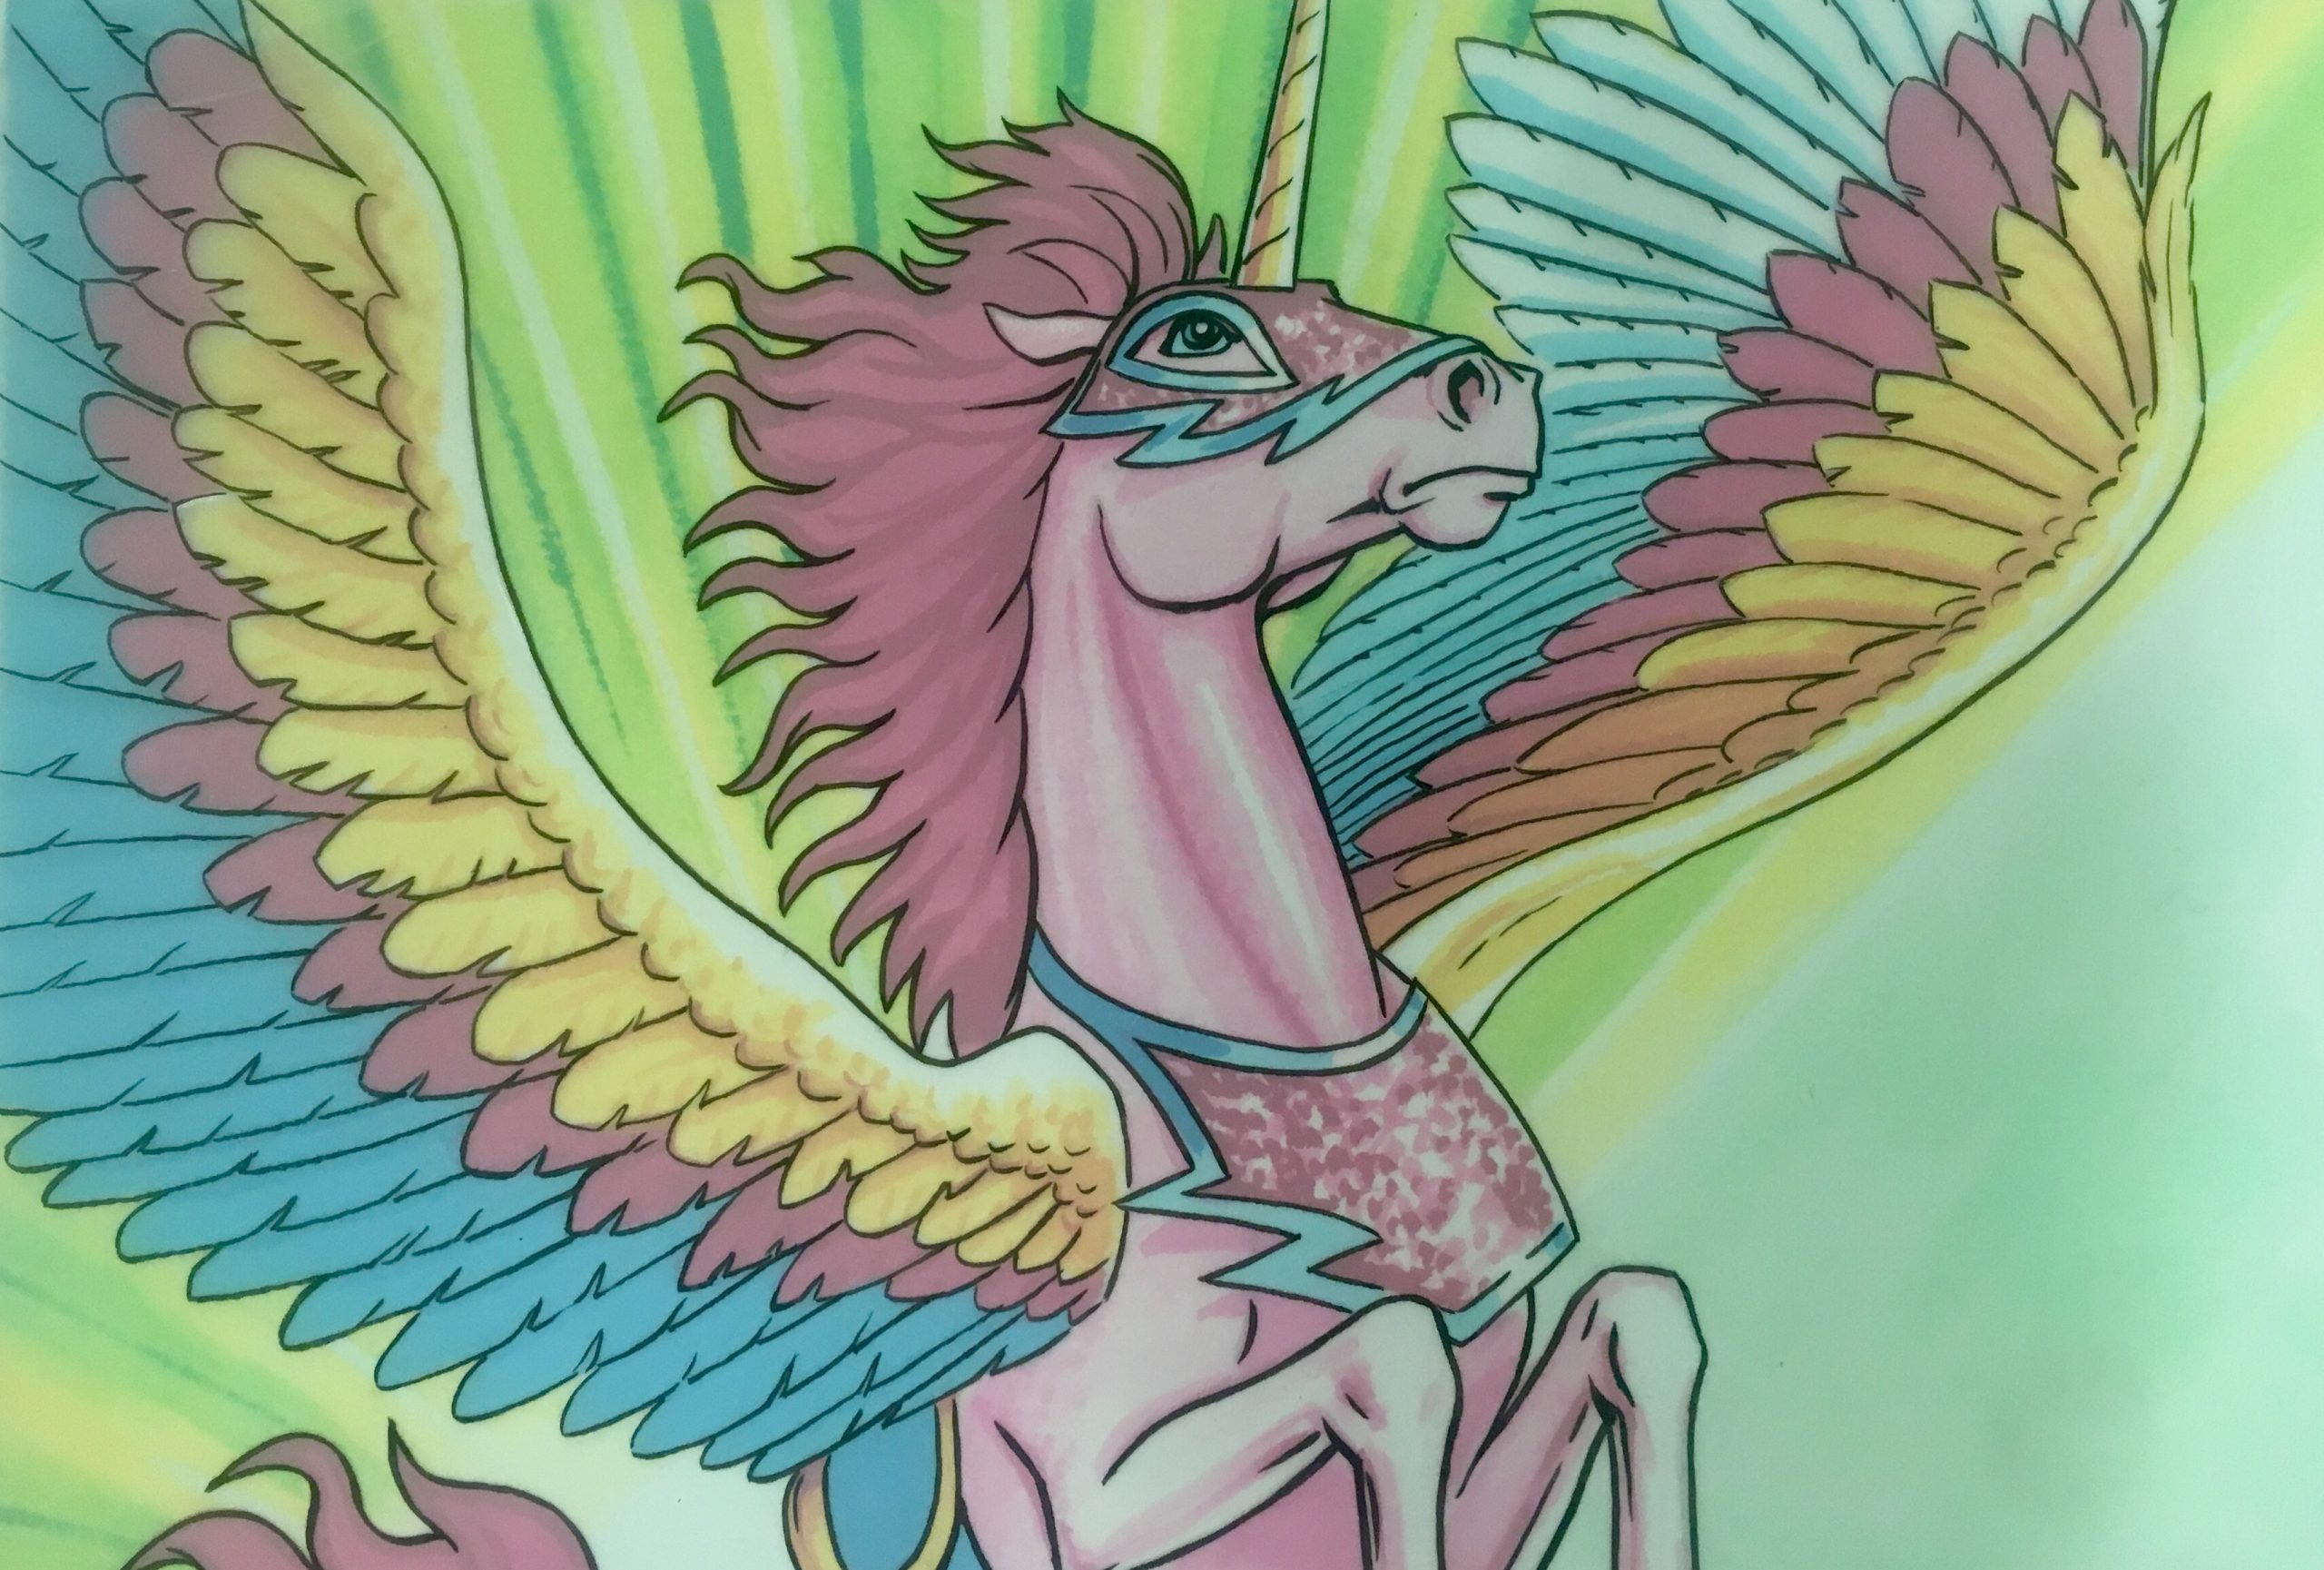 Head and shoulders of rearing pink horse with mulit-coloured outstretched wings and a horn. The horse is wearing a pink breastplate with blue edges and a pink mask with blue edges